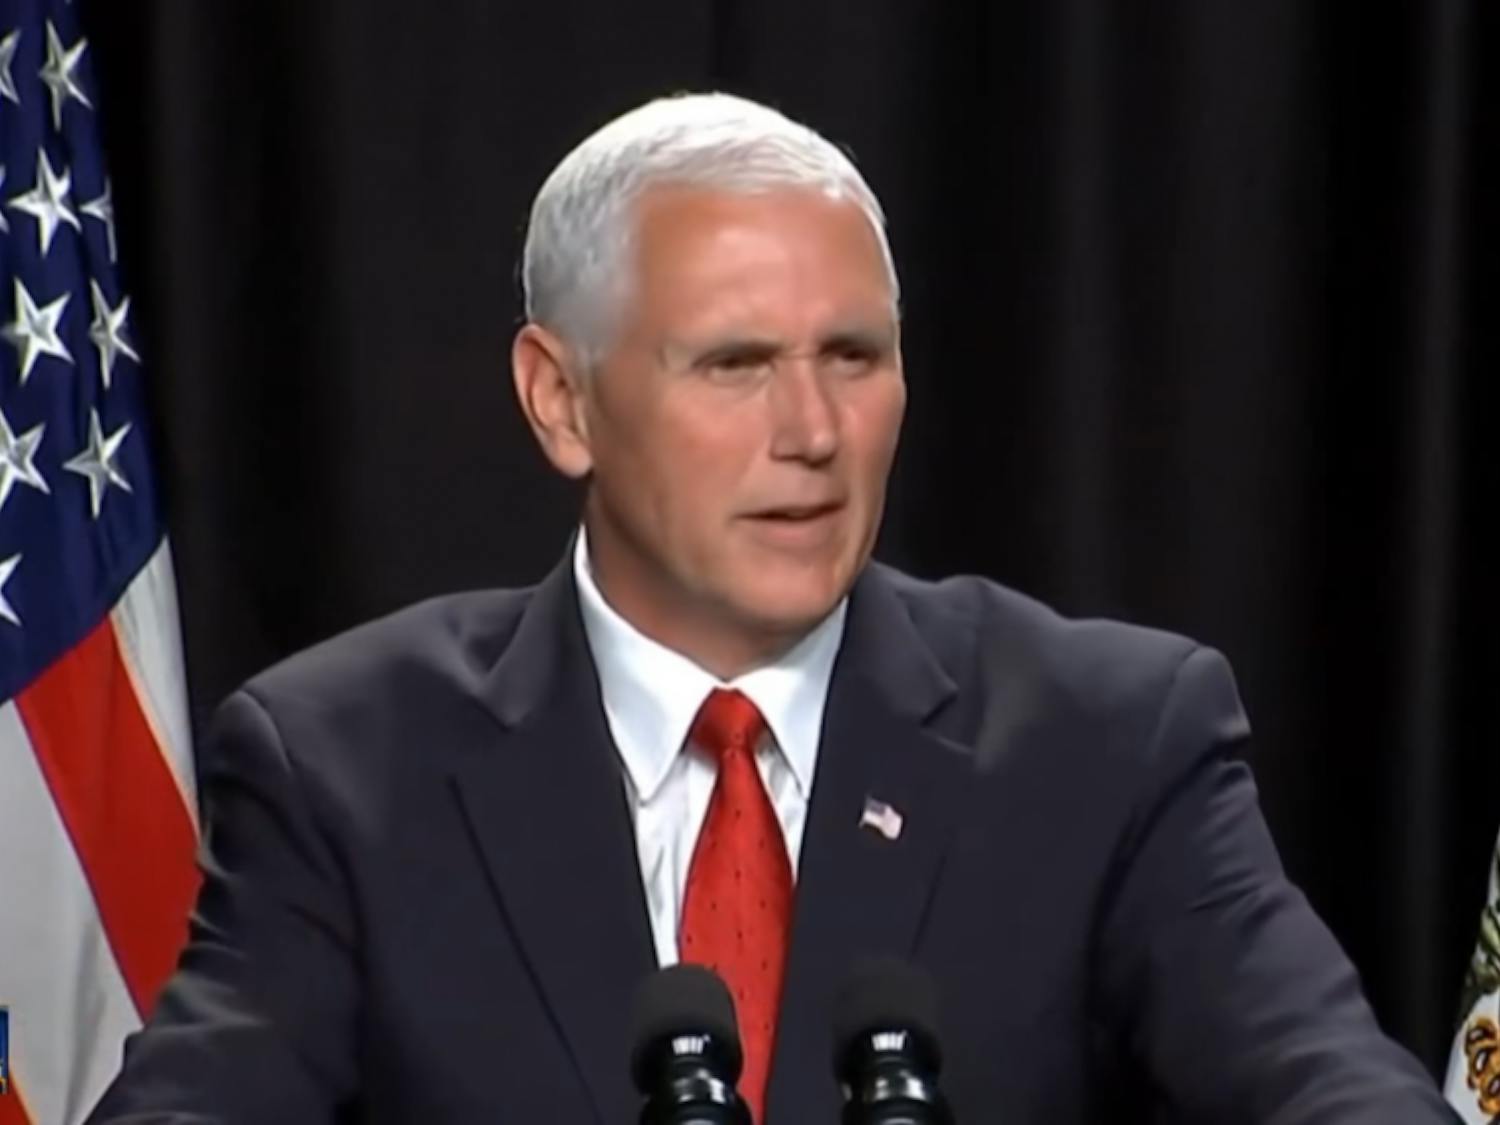 Vice President Mike Pence addressed high school students in Kerwin Hall on Wednesday.